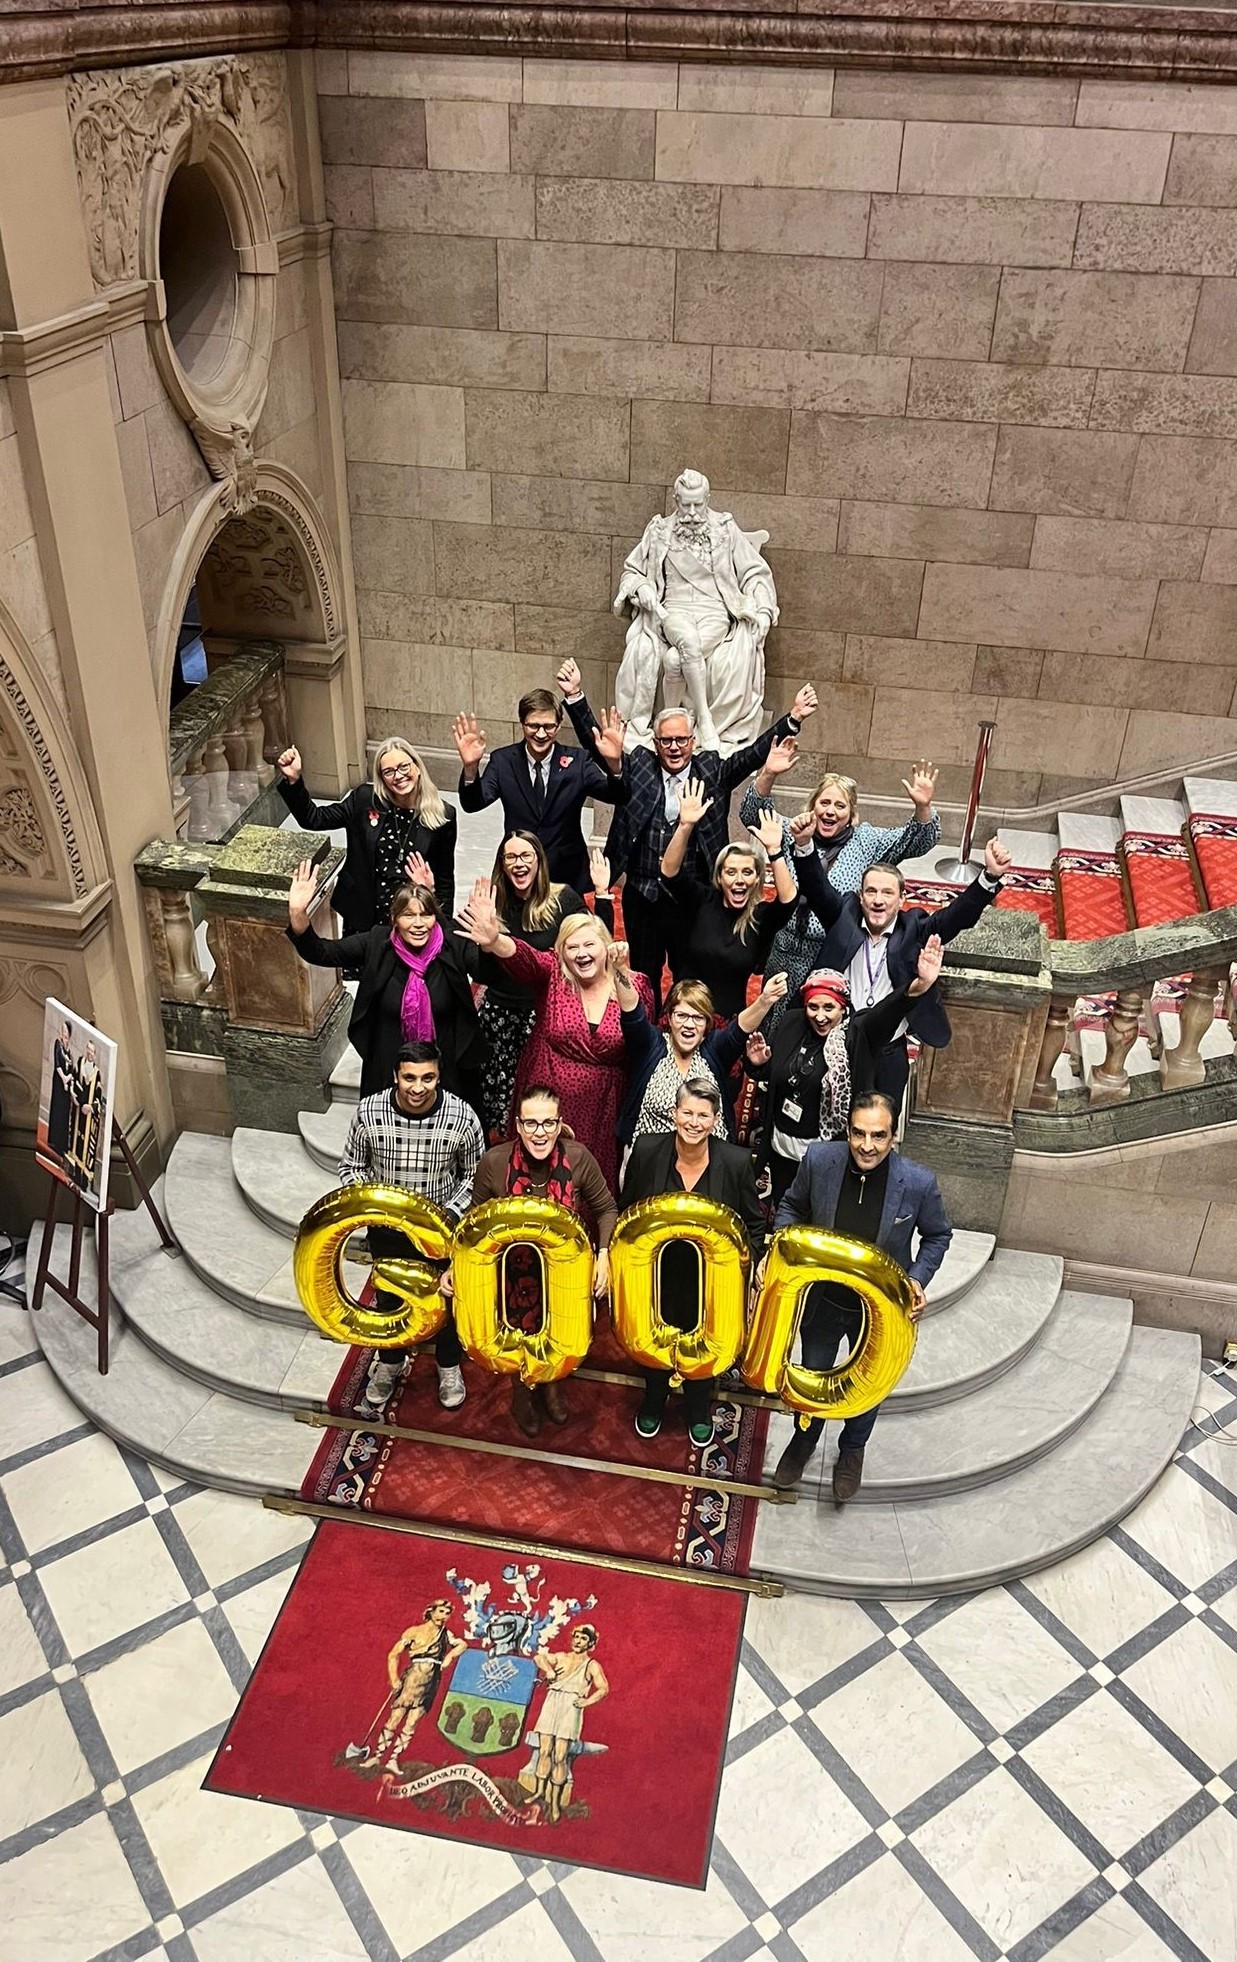 Officers and councillors stand on the bottom of the main staircase in Sheffield Town Hall with arms in the air celebrating the Ofsted result with four gold balloons held at the fron saying 'GOOD'